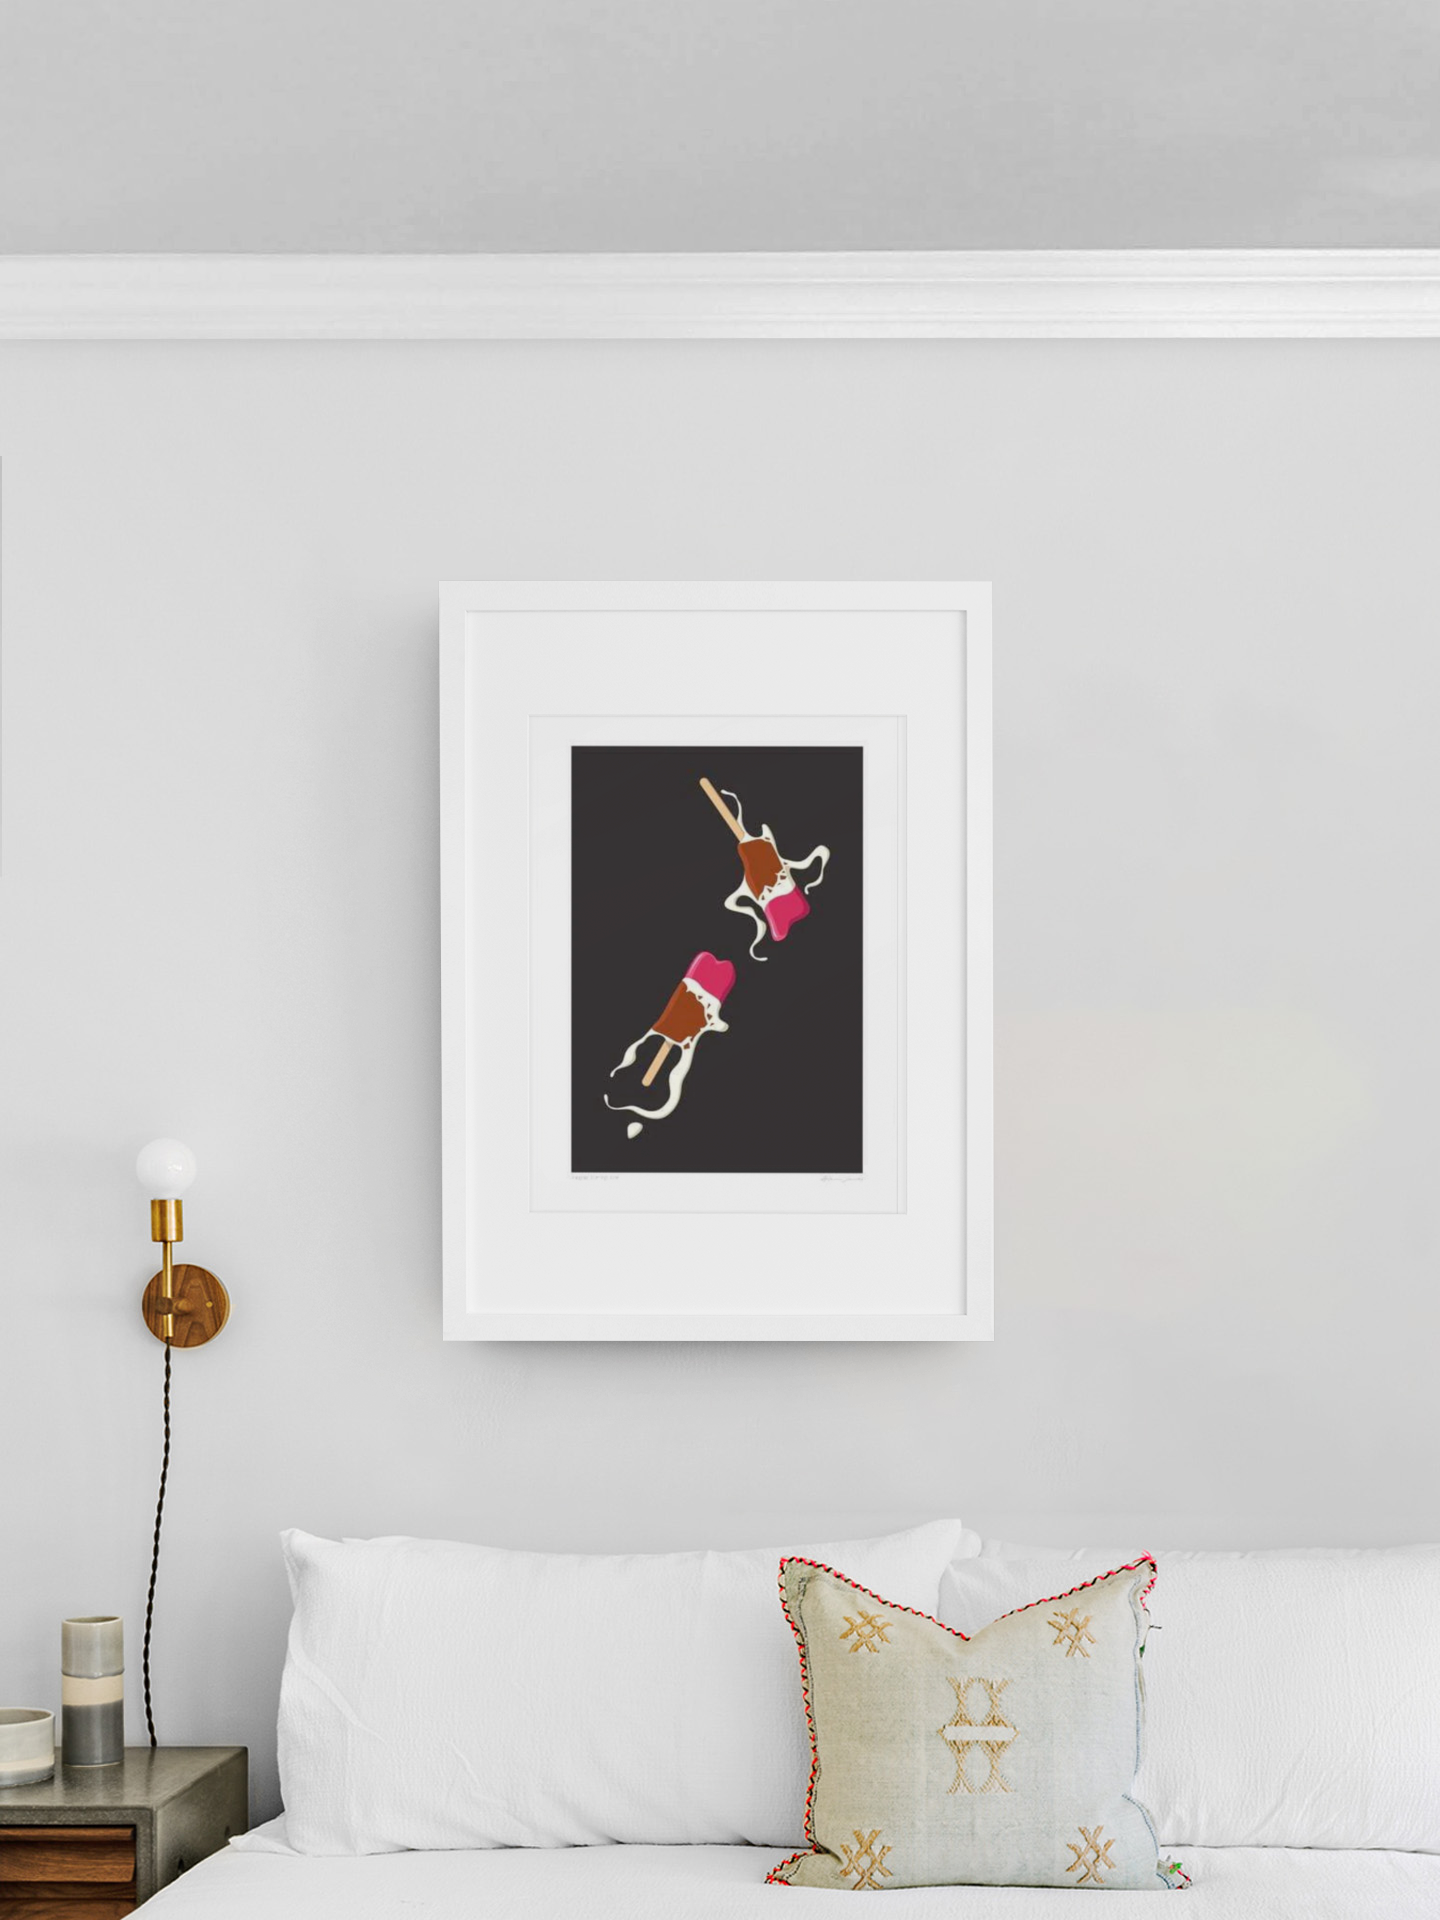 A minimalistic and stylish room with a clean white wall featuring a framed abstract artwork of a figure in motion, creating a sophisticated and contemporary atmosphere reminiscent of Glenn Jones's From Tip to Tip product flair.